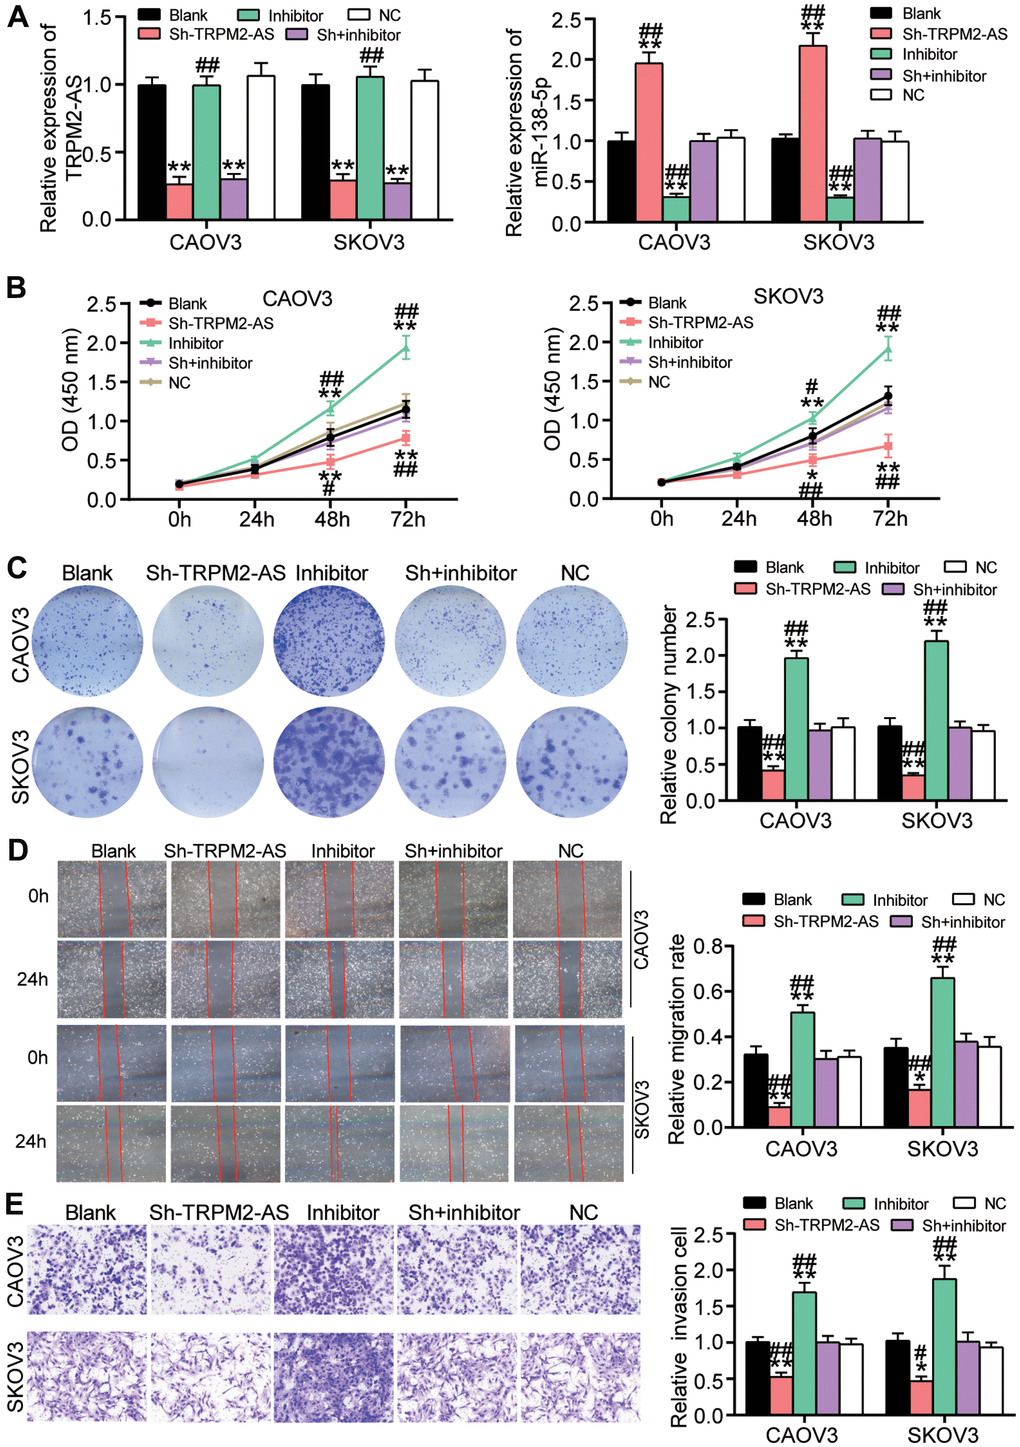 The inhibitory effect of TRPM2-AS knockdown on OvC progression was attenuated by miR-138-5p inhibitor. (A) The high transfection efficiency of sh-TRPM2-AS and miR-138-5p inhibitor in CAOV3 and SKOV3 cells. (B) MiR-138-5p inhibitor attenuated the inhibitory effect of TRPM2-AS knockdown on cell viability in CAOV3 and SKOV3 cells. (C) The inhibitory effect of TRPM2-AS knockdown on colony formation was overturned by miR-138-5p inhibitor. (D) The negative role of sh-TRPM2-AS on cell migration was relieved by miR-138-5p inhibitor. (E) The negative role of sh-TRPM2-AS on cell invasion was impaired by miR-138-5p inhibitor. Blank, blank control. NC, negative control. Sh, Sh-TRPM2-AS. Inhibitor, miR-138-5p inhibitor. *PP##P